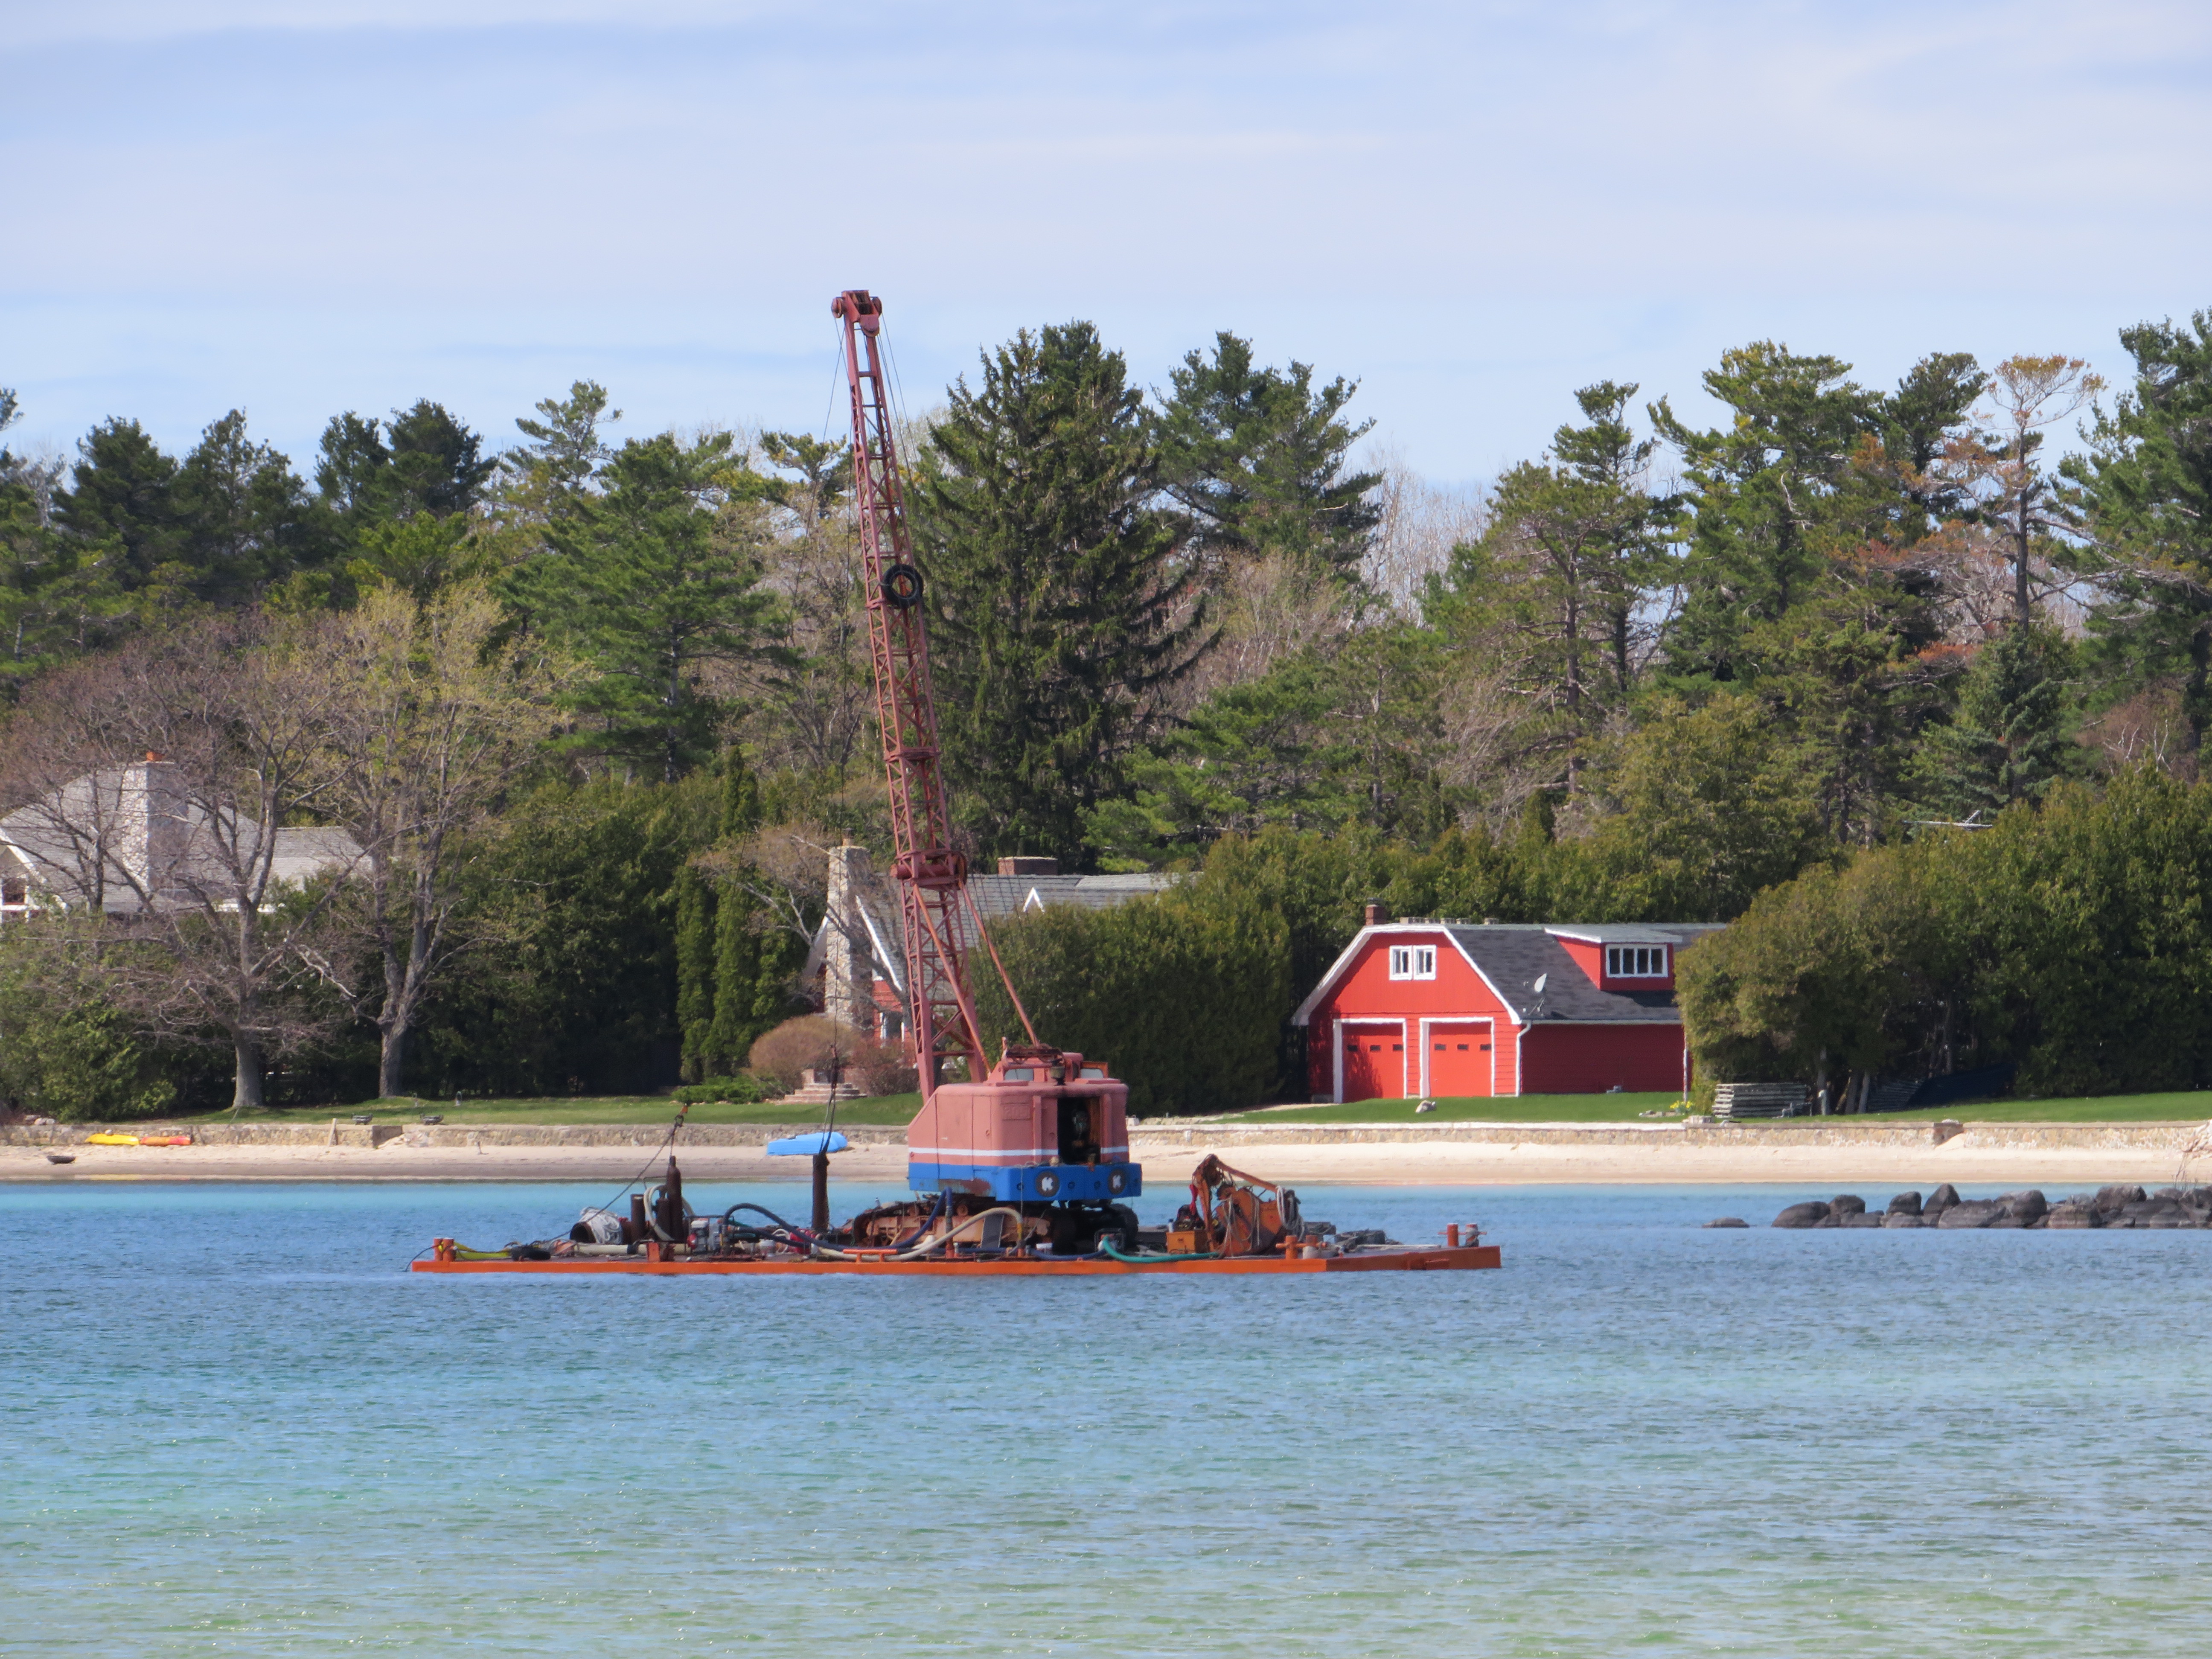 A barge owned by Balcom Marine Contracting is floating again after sinking for a second time in Grand Traverse Bay.